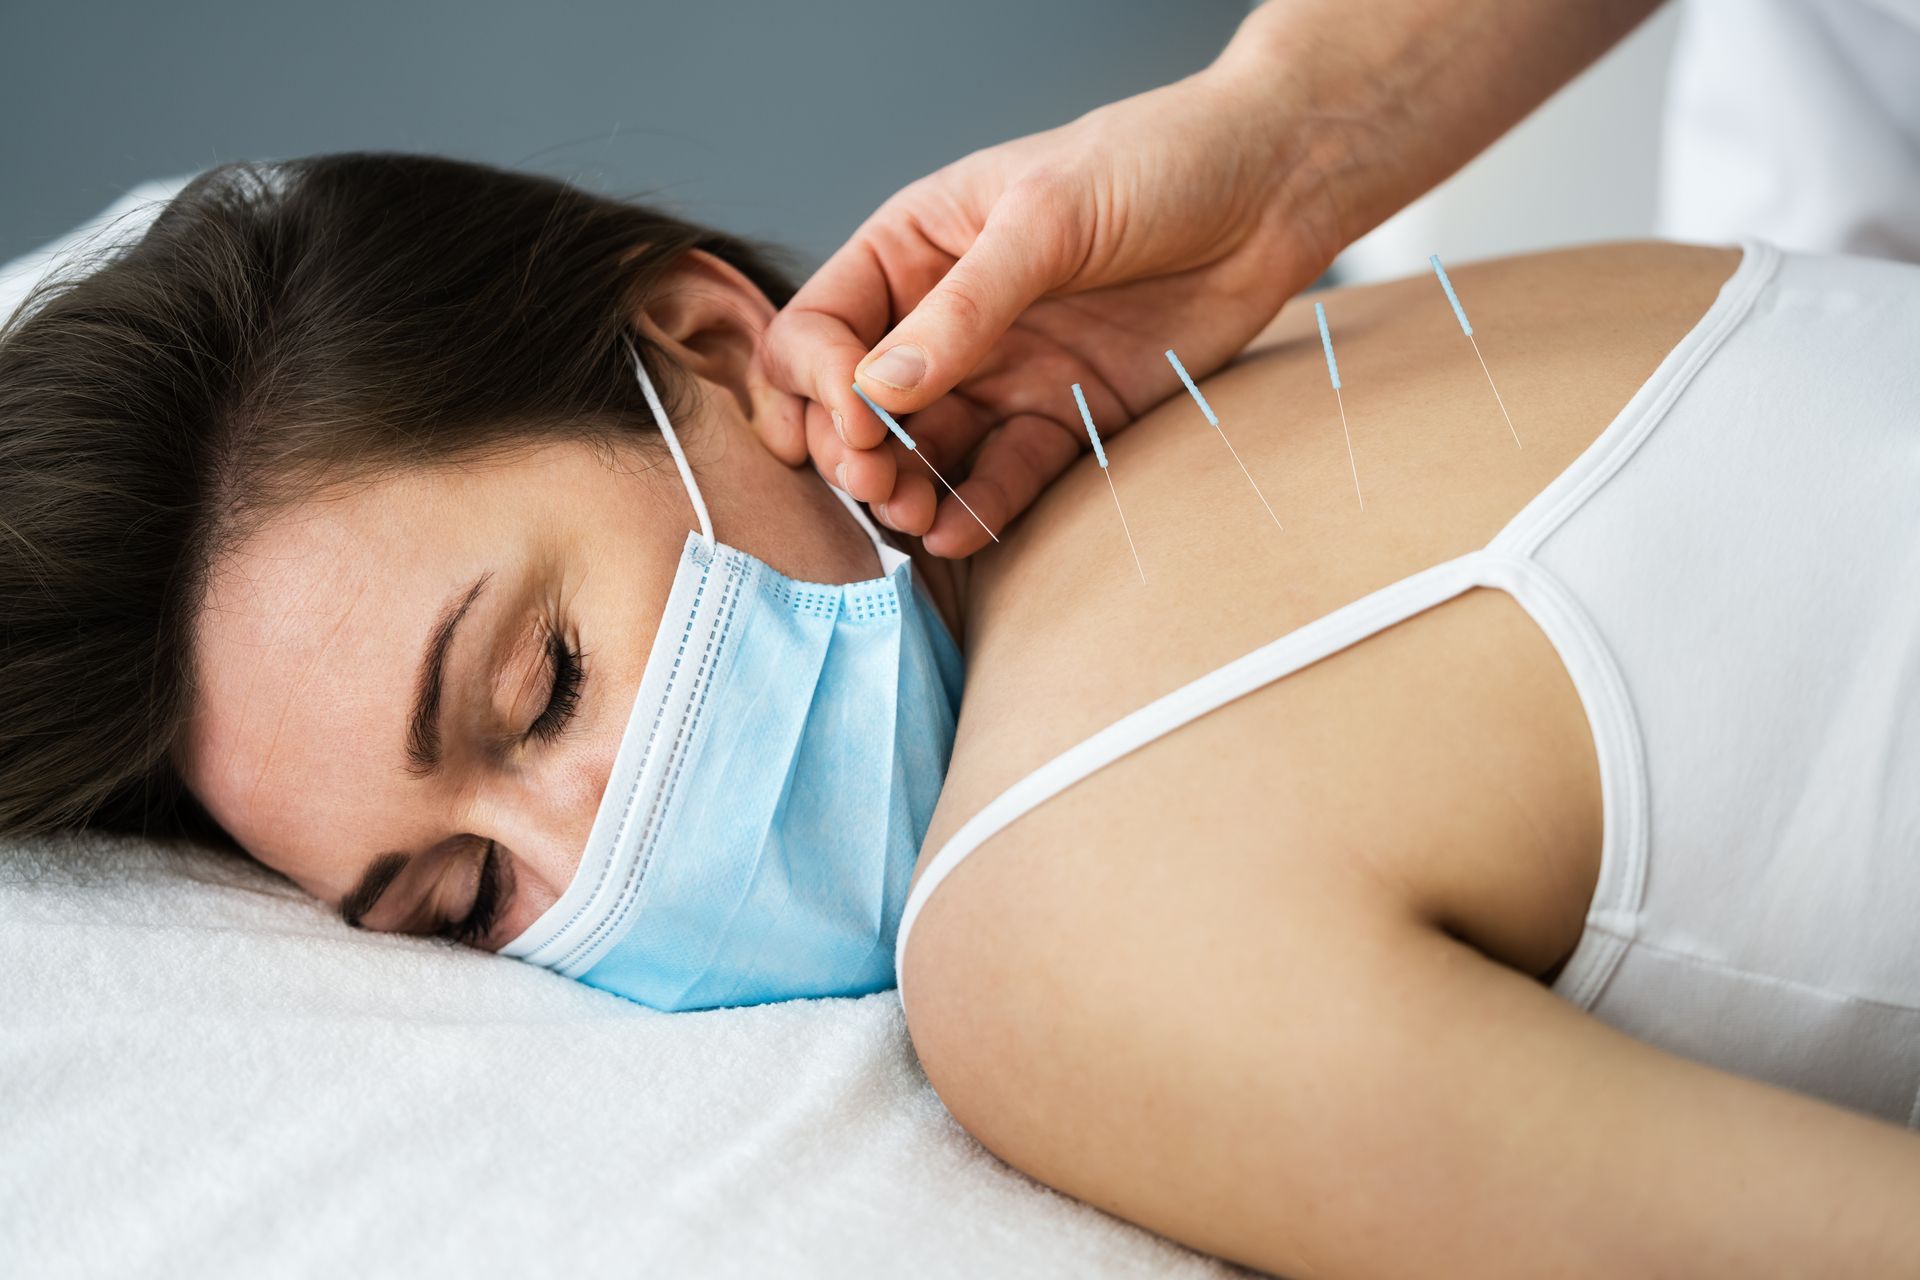 A woman wearing a mask is getting acupuncture on her neck.